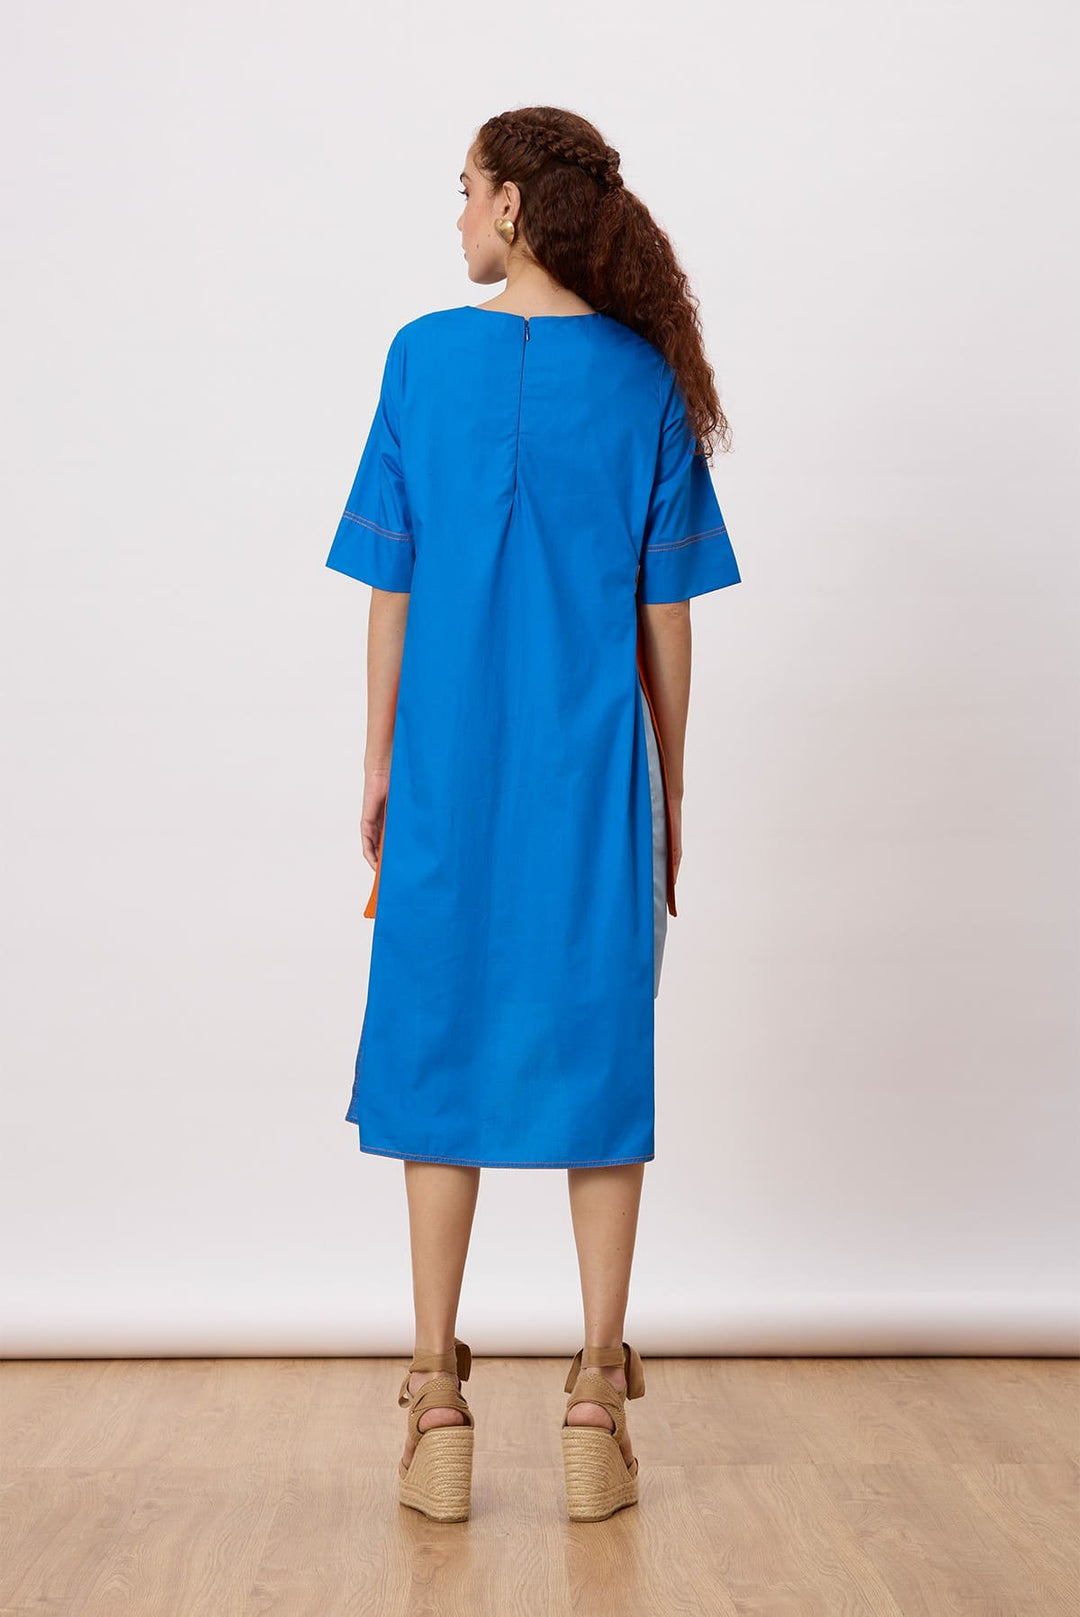 July Dress A relaxed, a-line dress with contrast panels and buckle belt detail at the sides